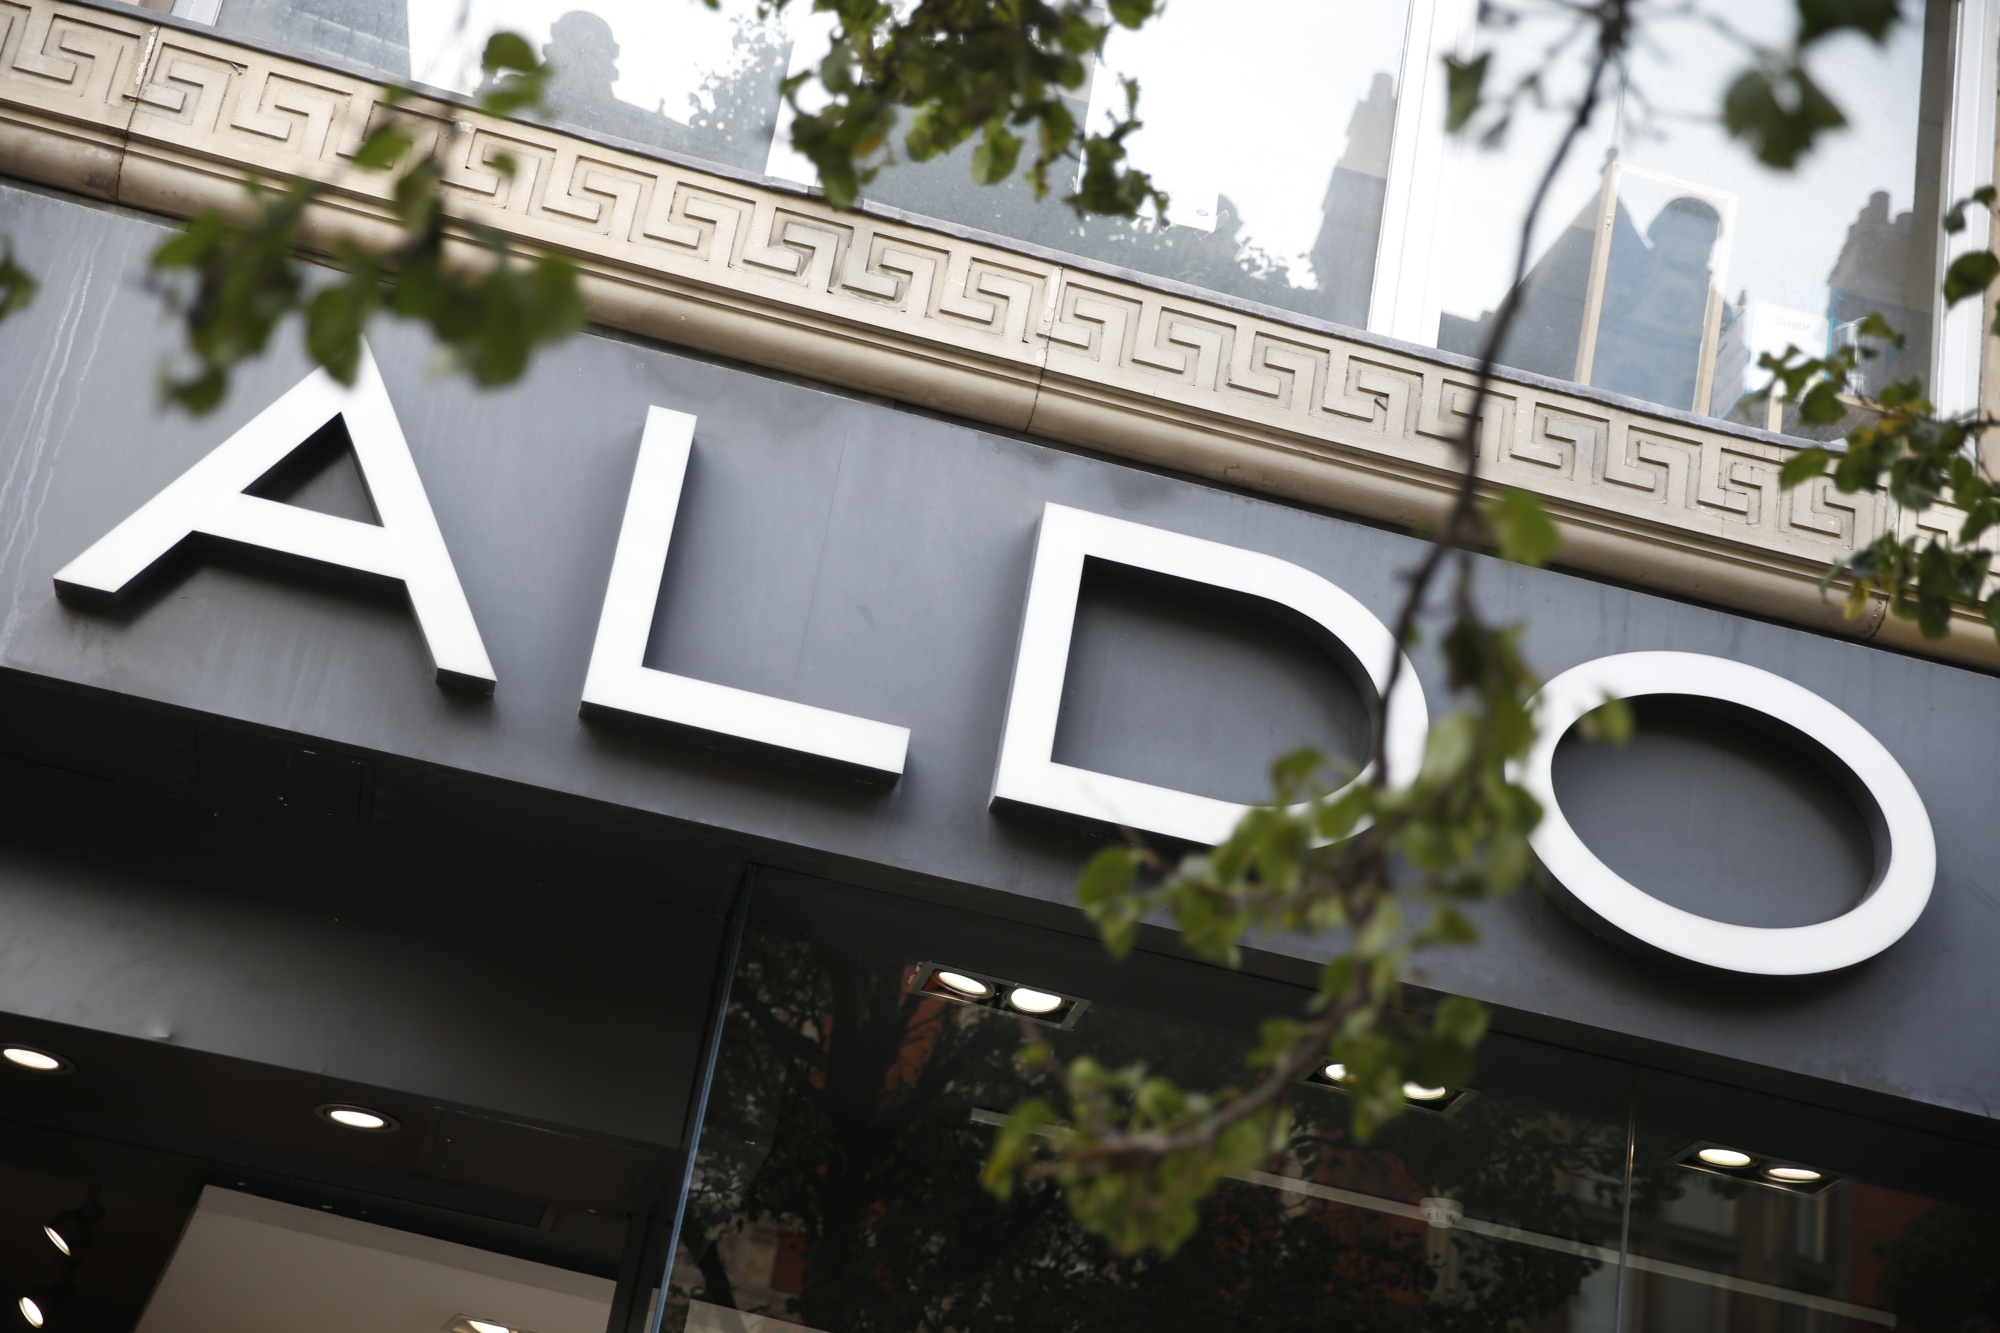 Shoe Chain Aldo Seeks Bankruptcy Protection to Trim - Bloomberg